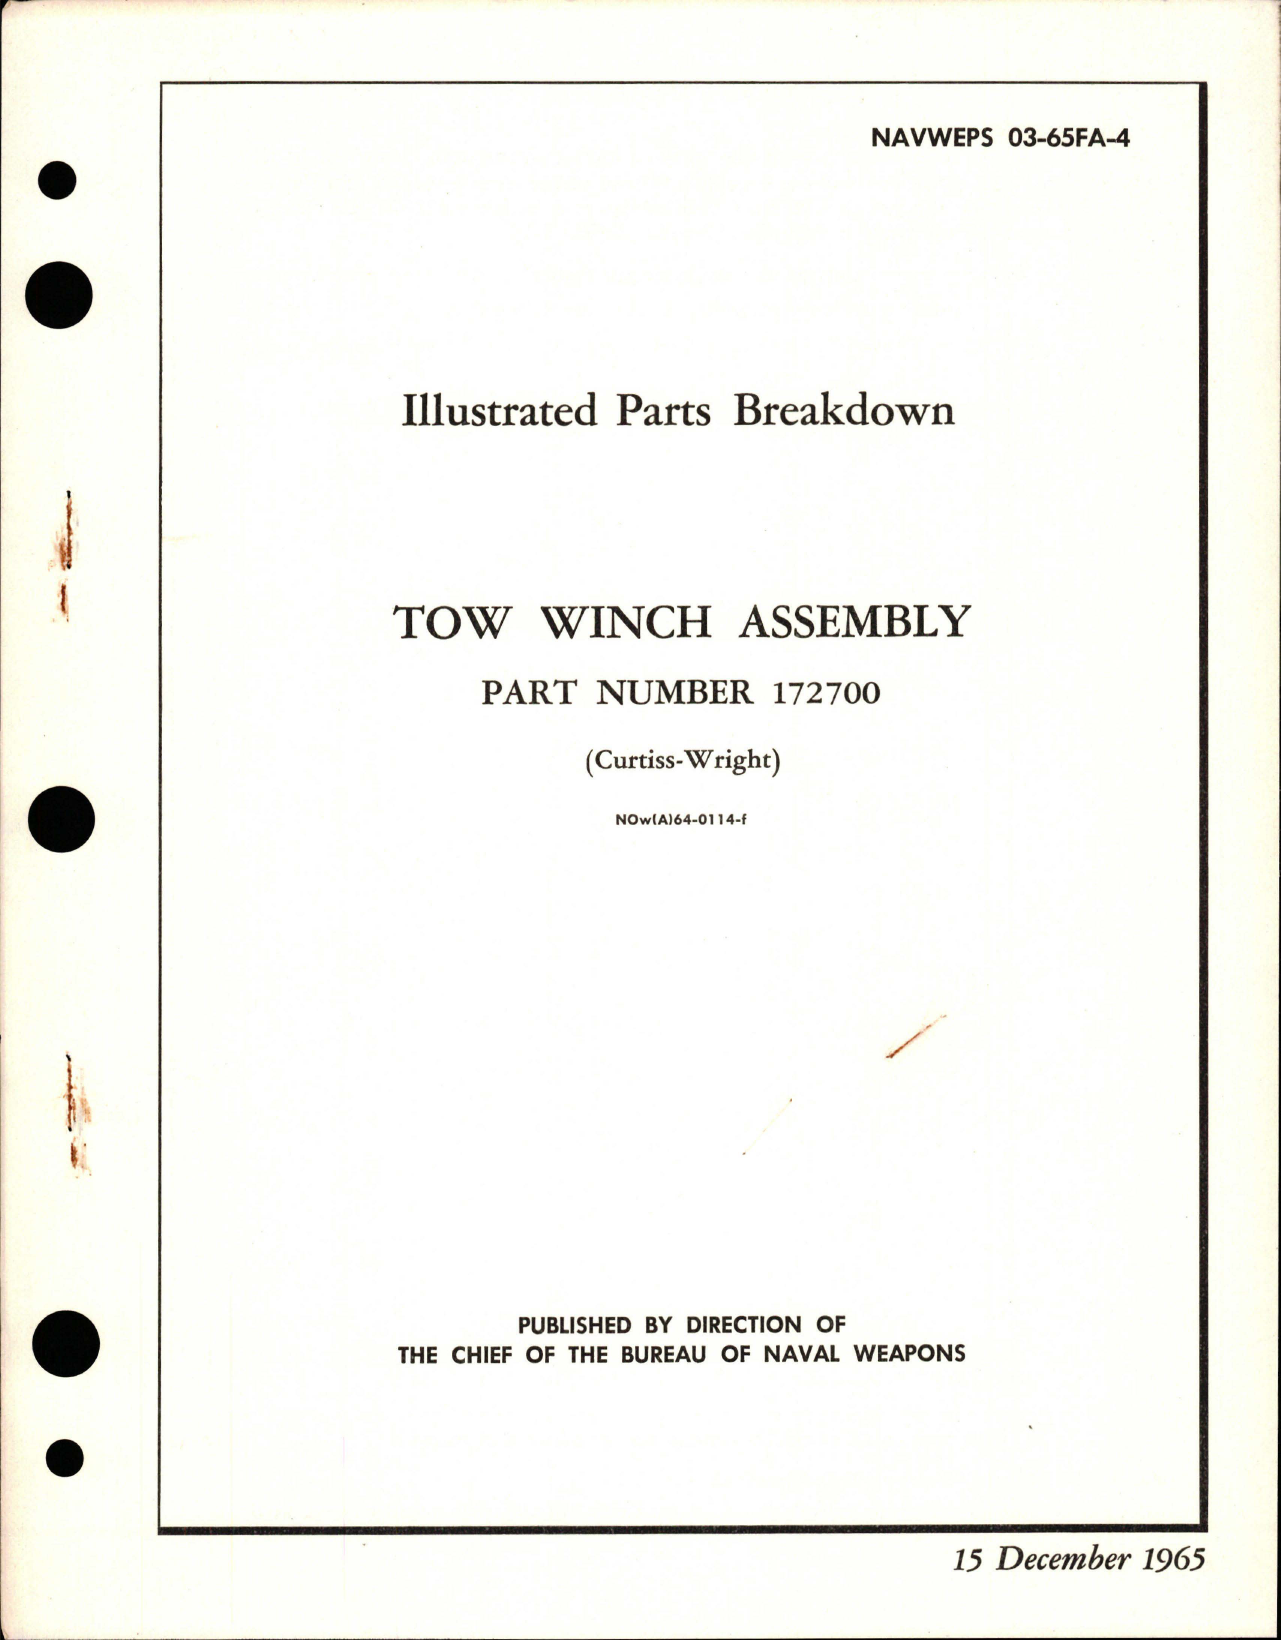 Sample page 1 from AirCorps Library document: Illustrated Parts Breakdown for Tow Winch Assembly - Part 172700 